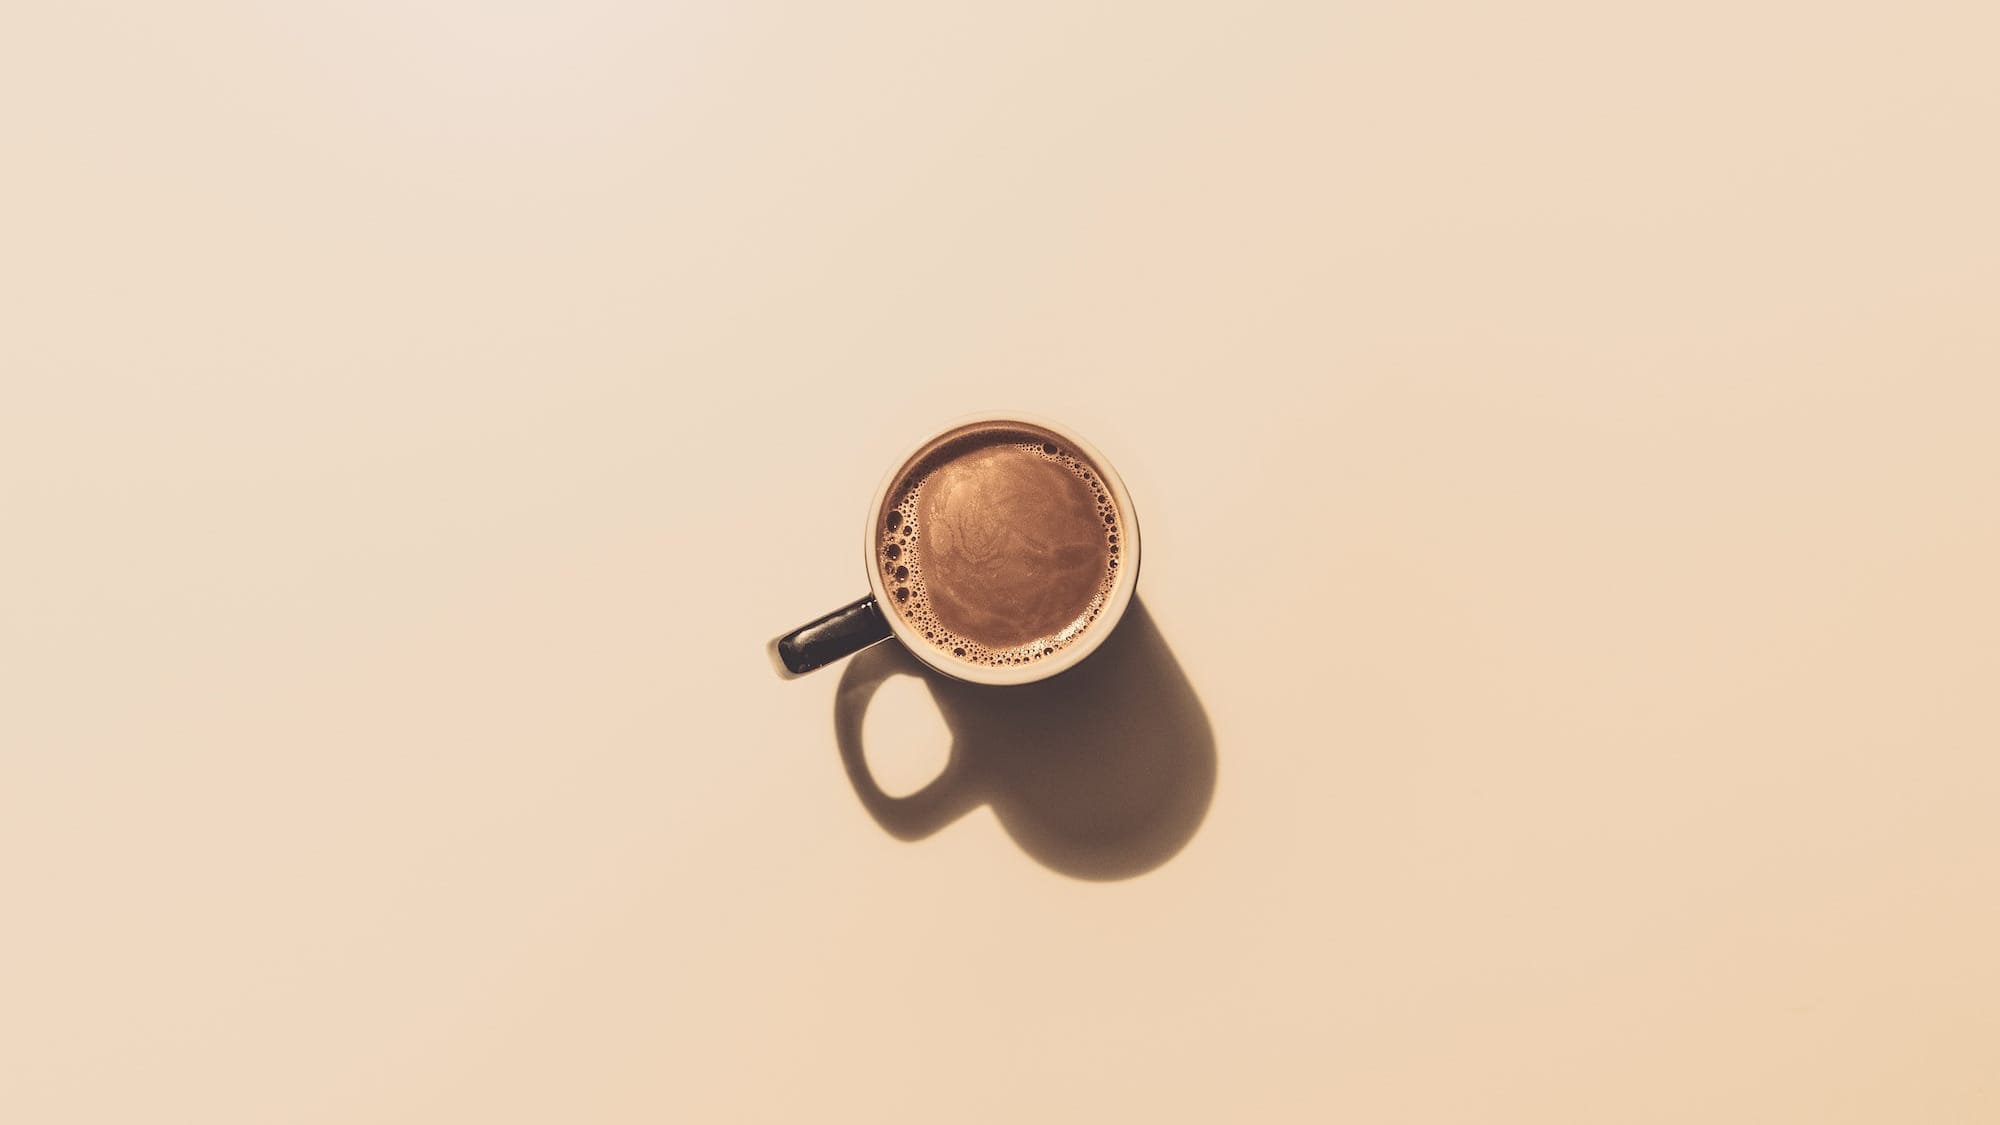 A cup of coffee on a cream background